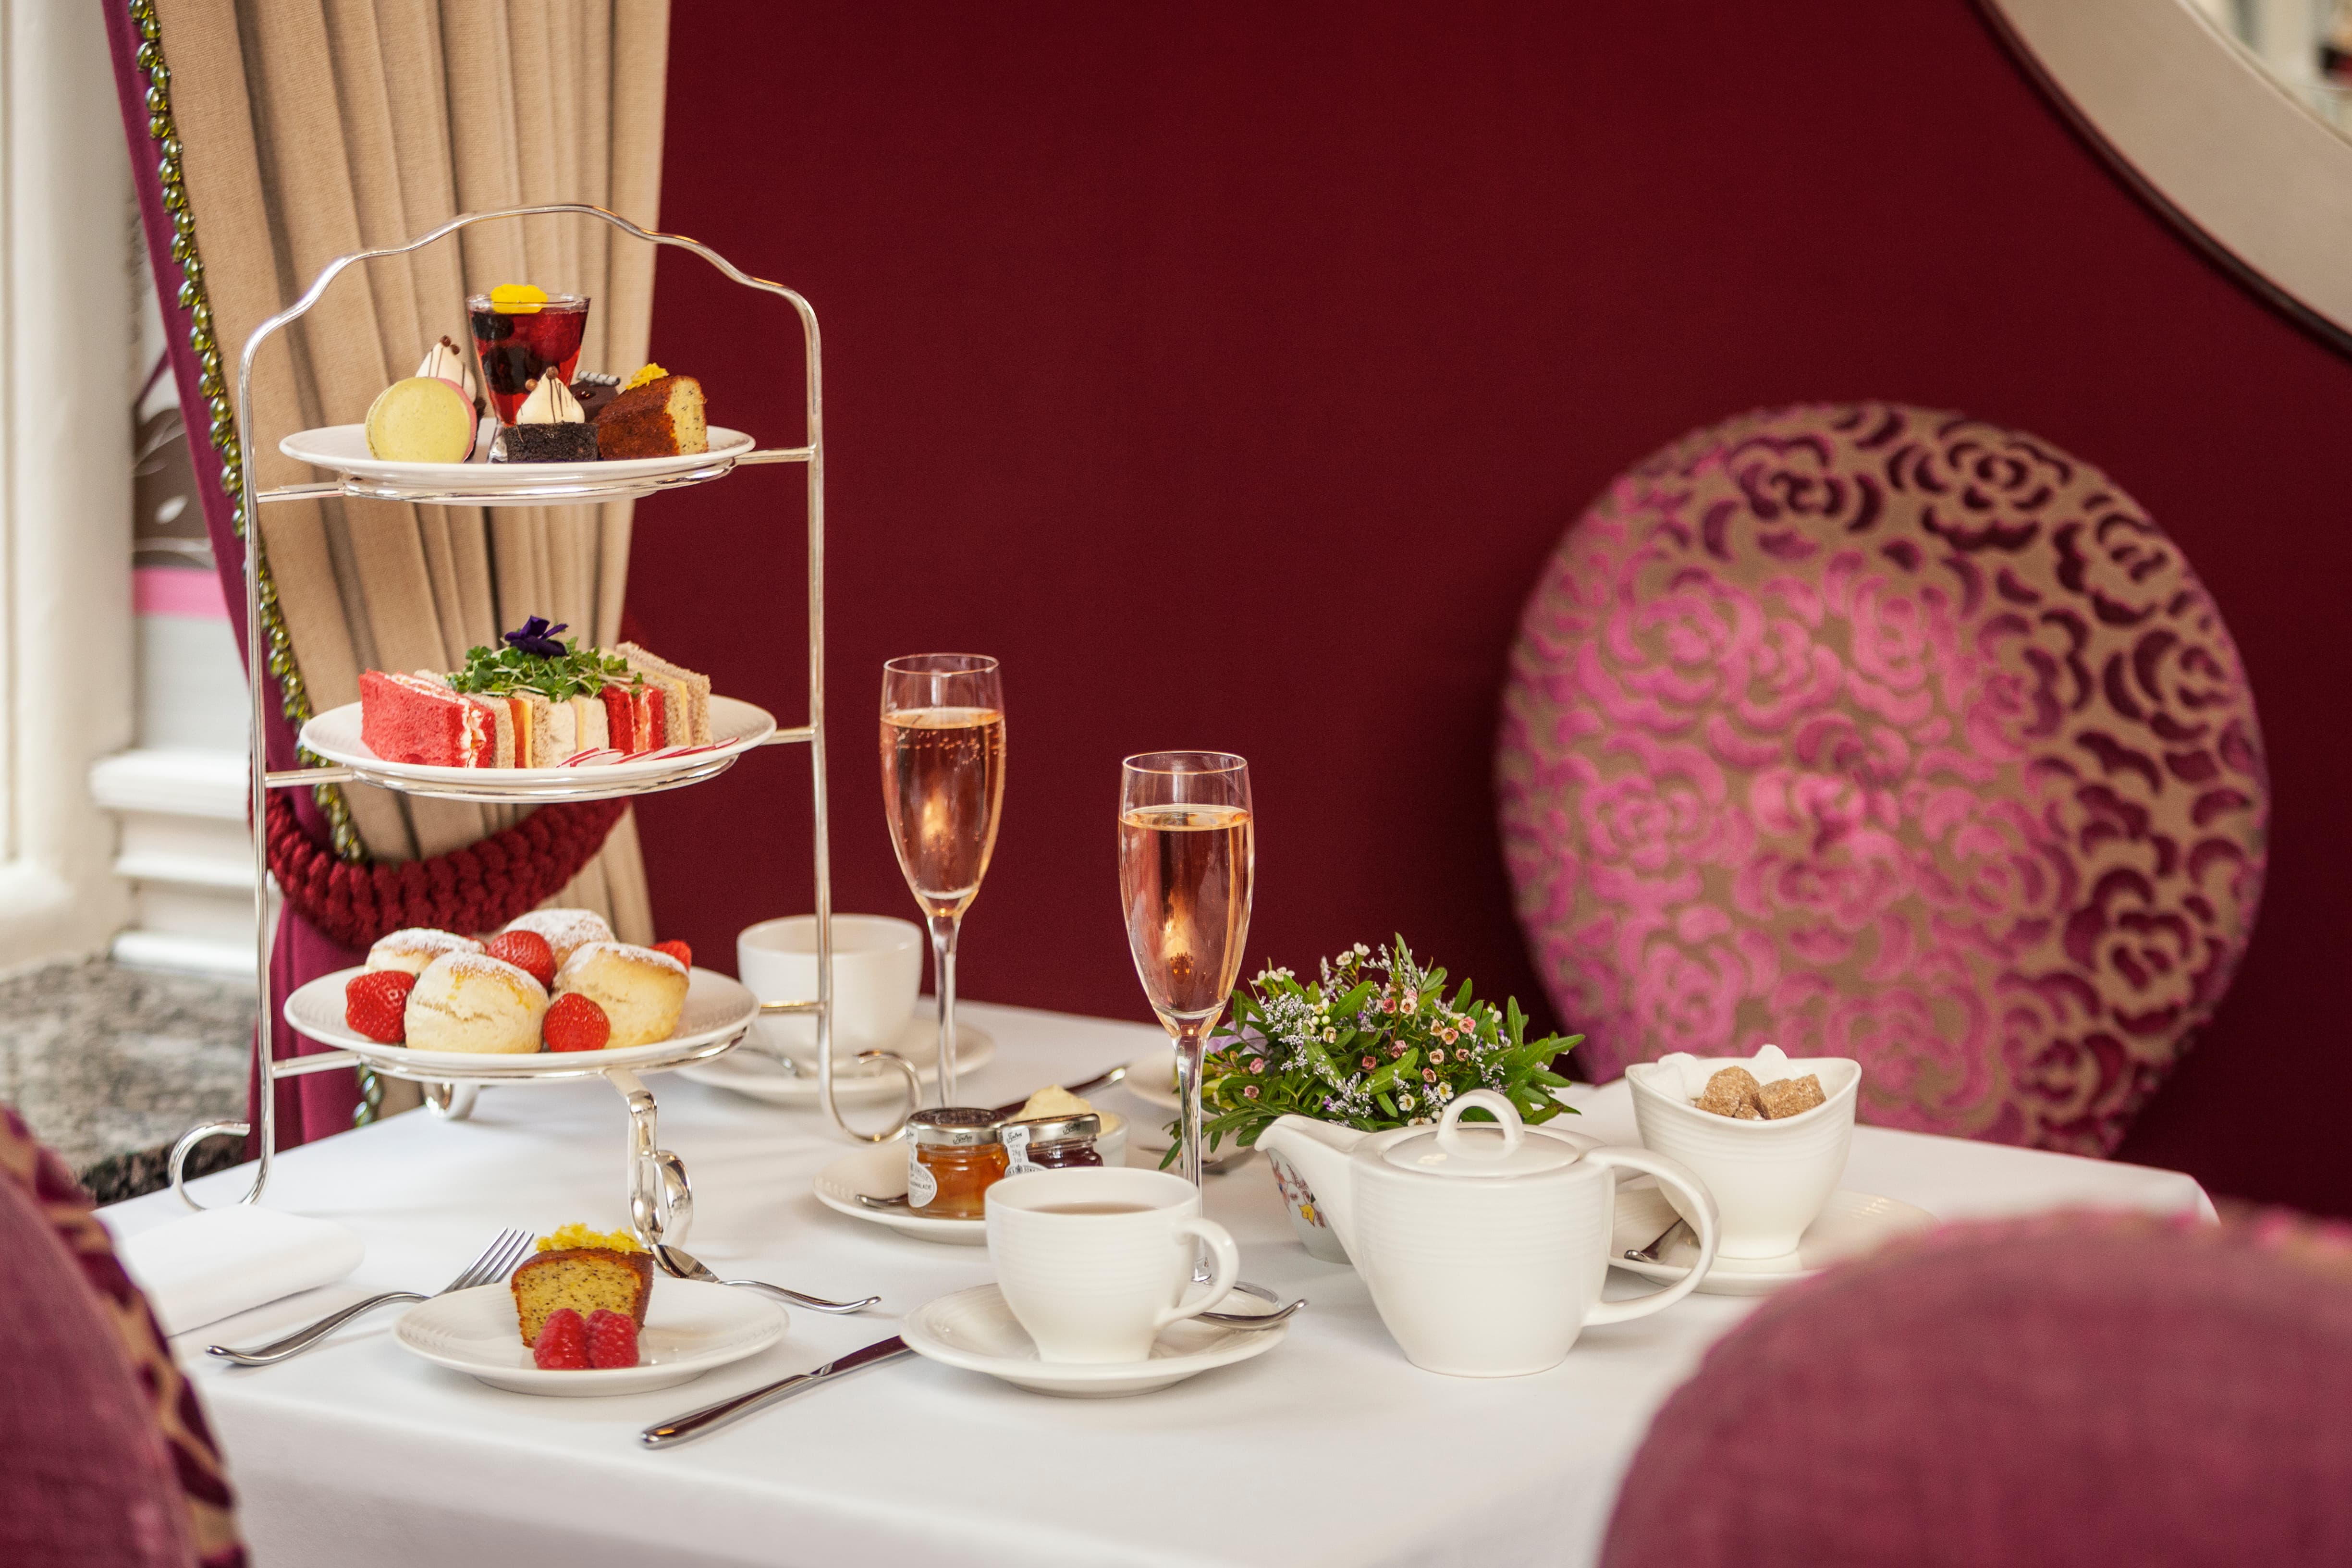 Afternoon Tea at The Capital Hotel & Apartments The Capital Hotel, Apartments and Townhouse - London London 020 7589 5171